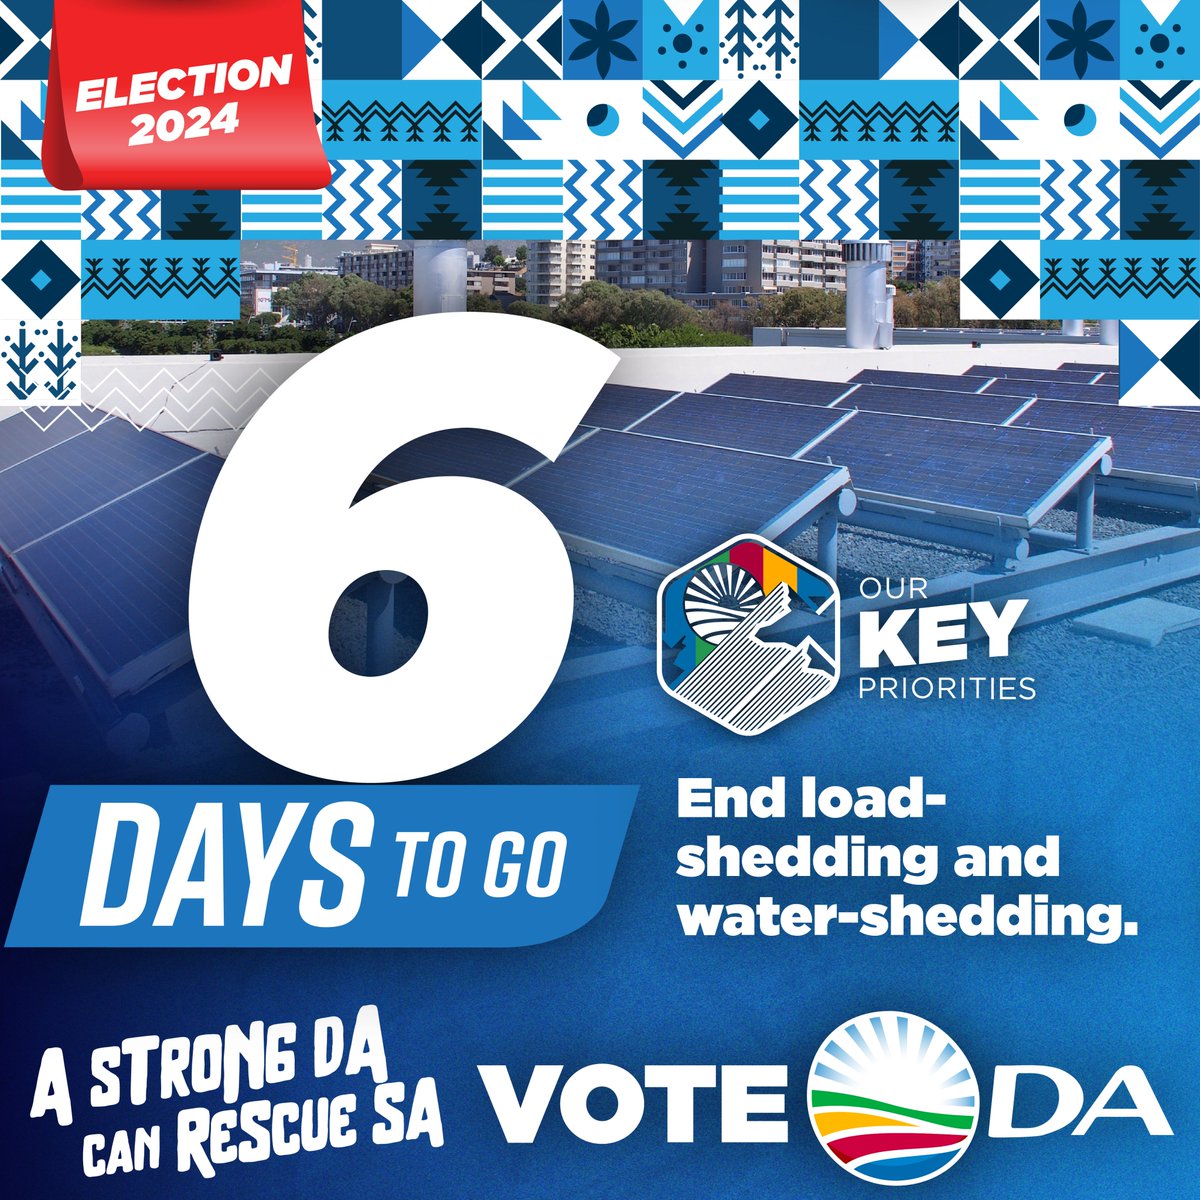 6️⃣ DAYS TO GO! The DA is implementing sustainable solutions to end load-shedding and water-shedding. On 29 May, vote for a party that has a solid plan to end load-shedding and water-shedding. #VoteDA! #RescueSA